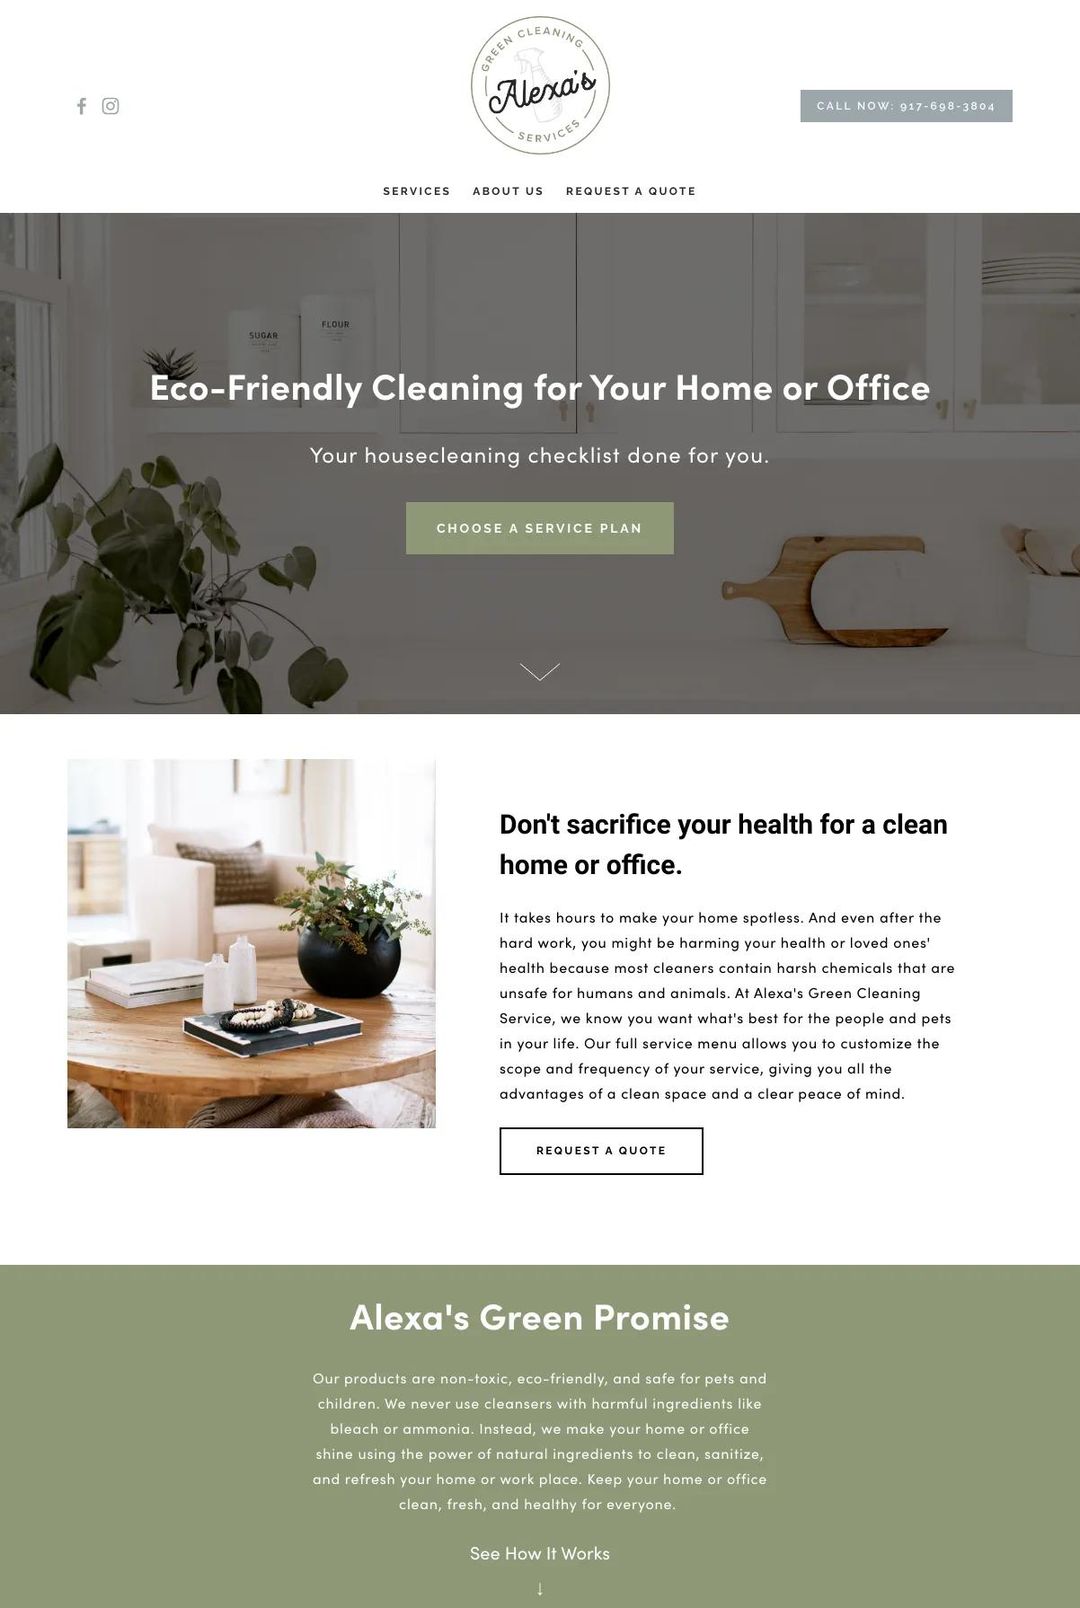 Screenshot 1 of Alexa's Green Cleaning Service (Example Squarespace Cleaning Services Website)